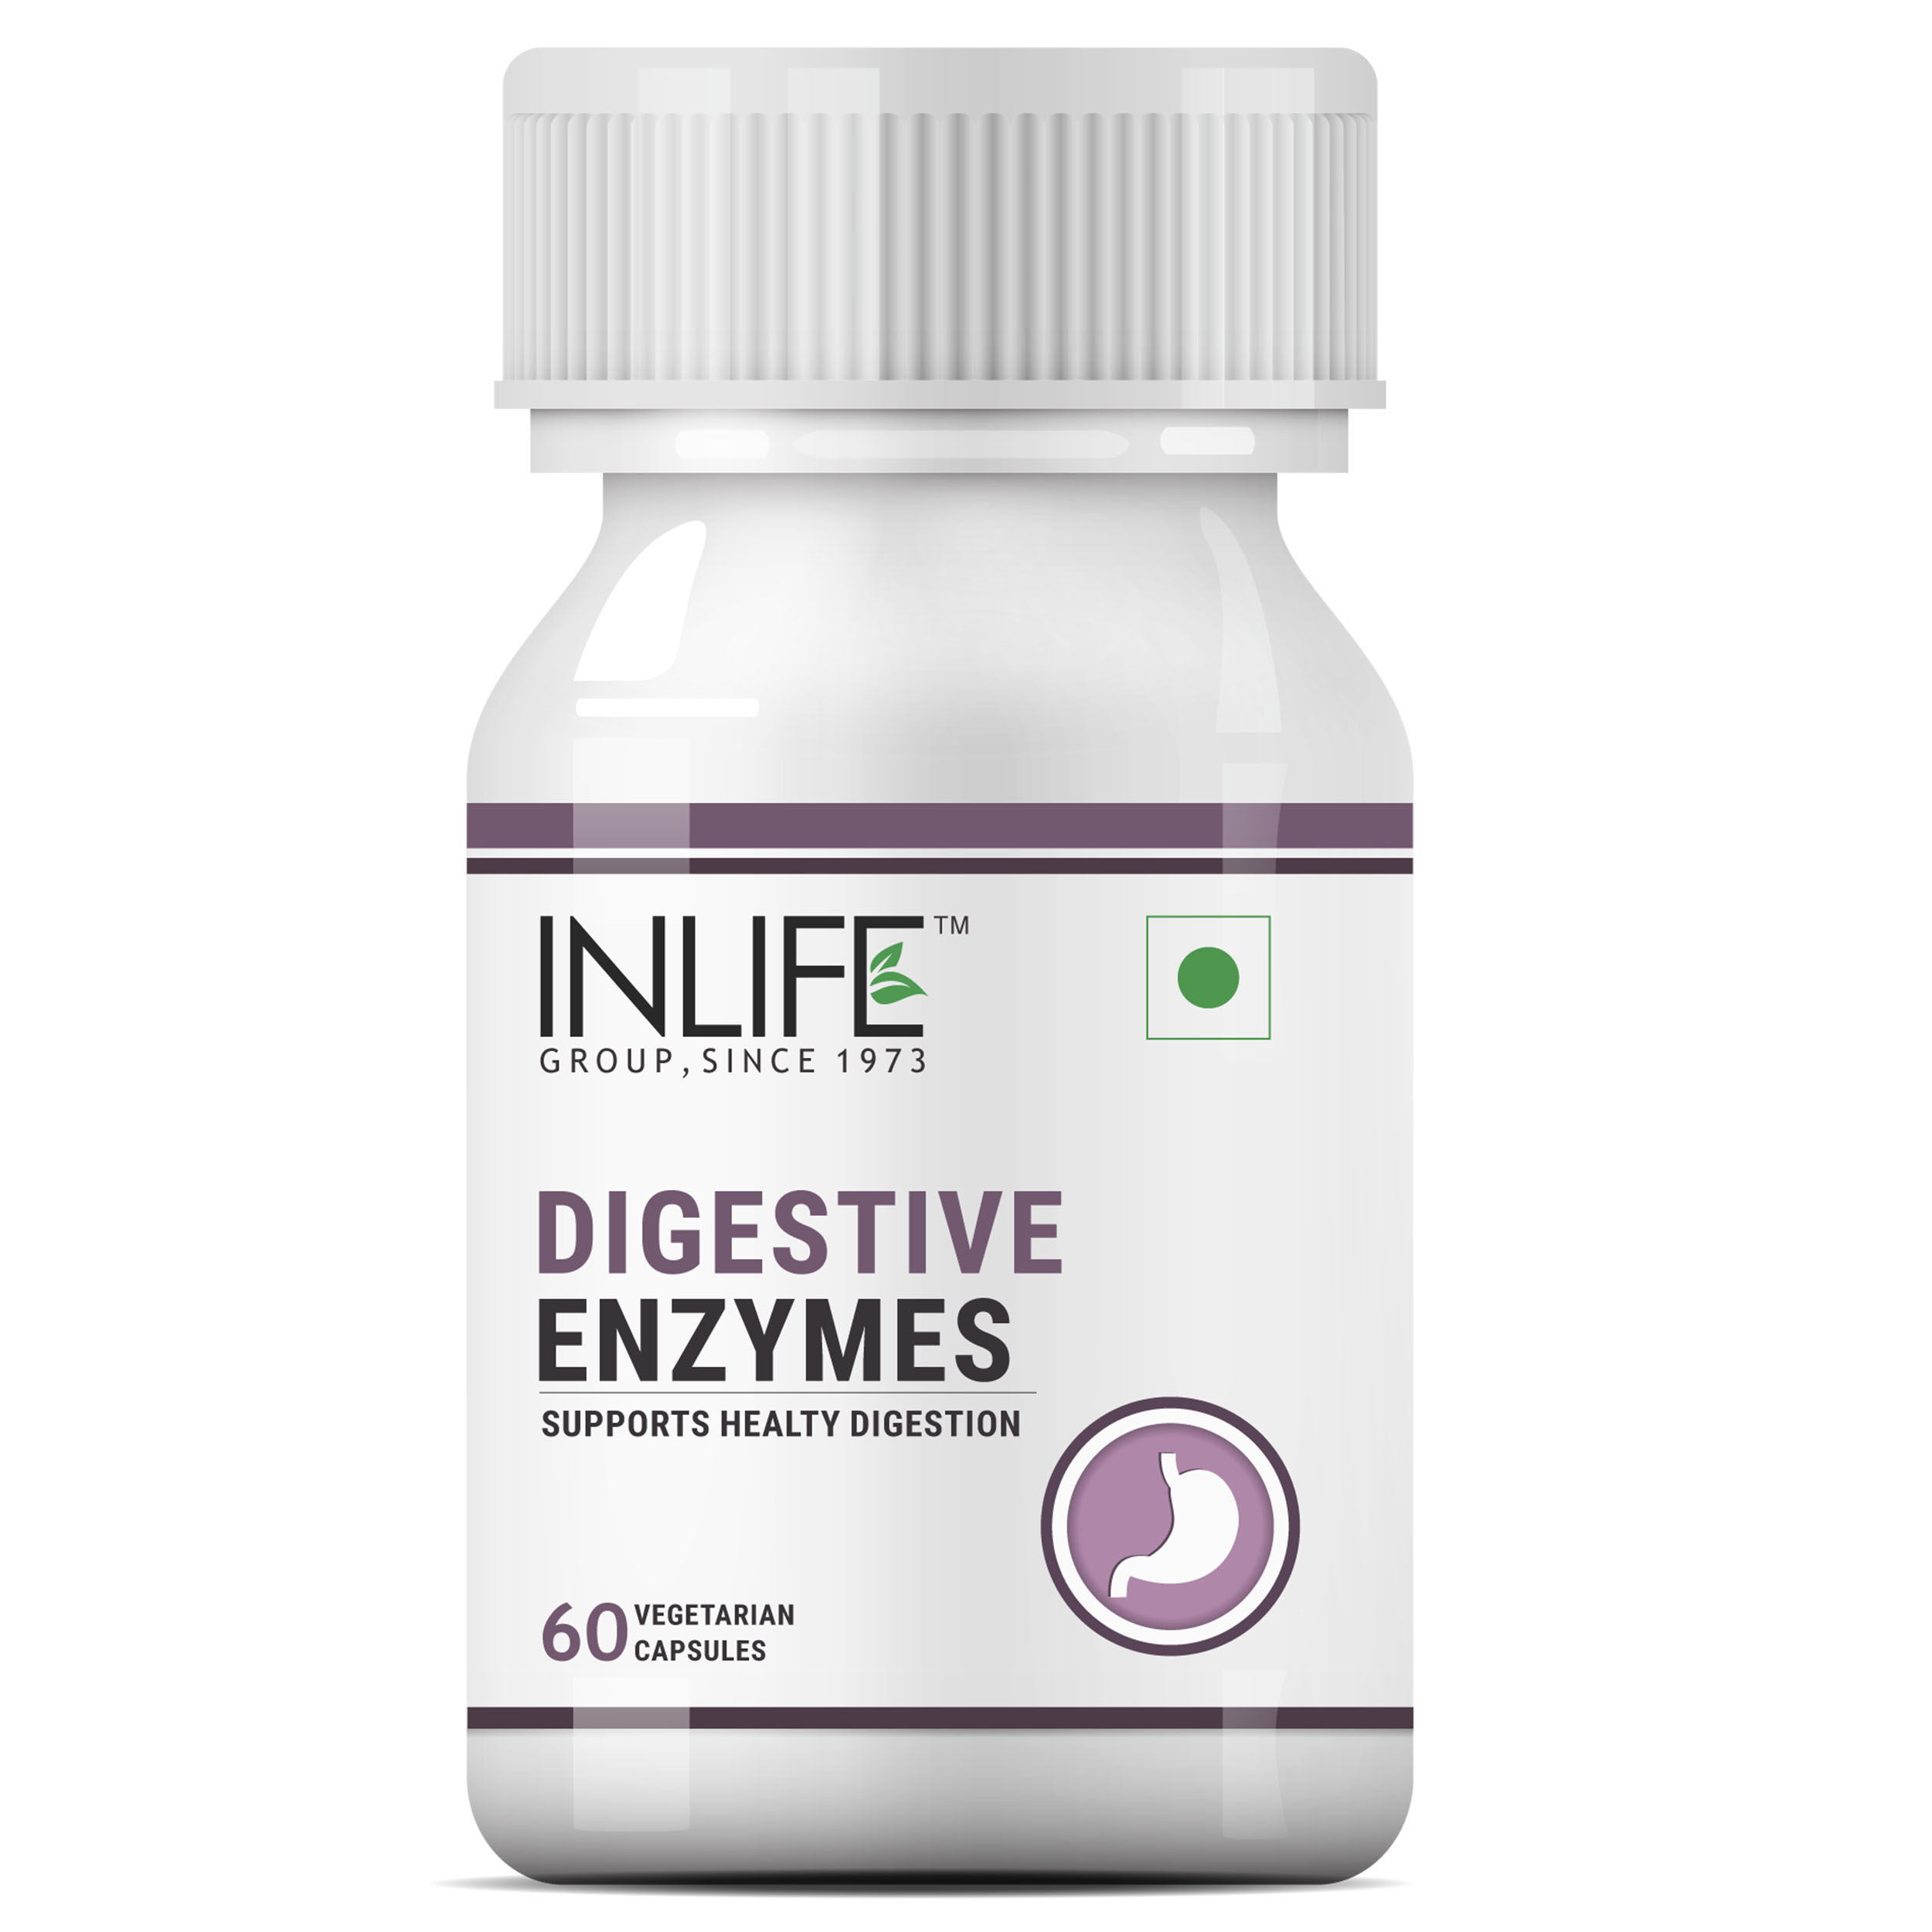 INLIFE Digestive Enzymes Supplement For Digestive Support 60 Capsules